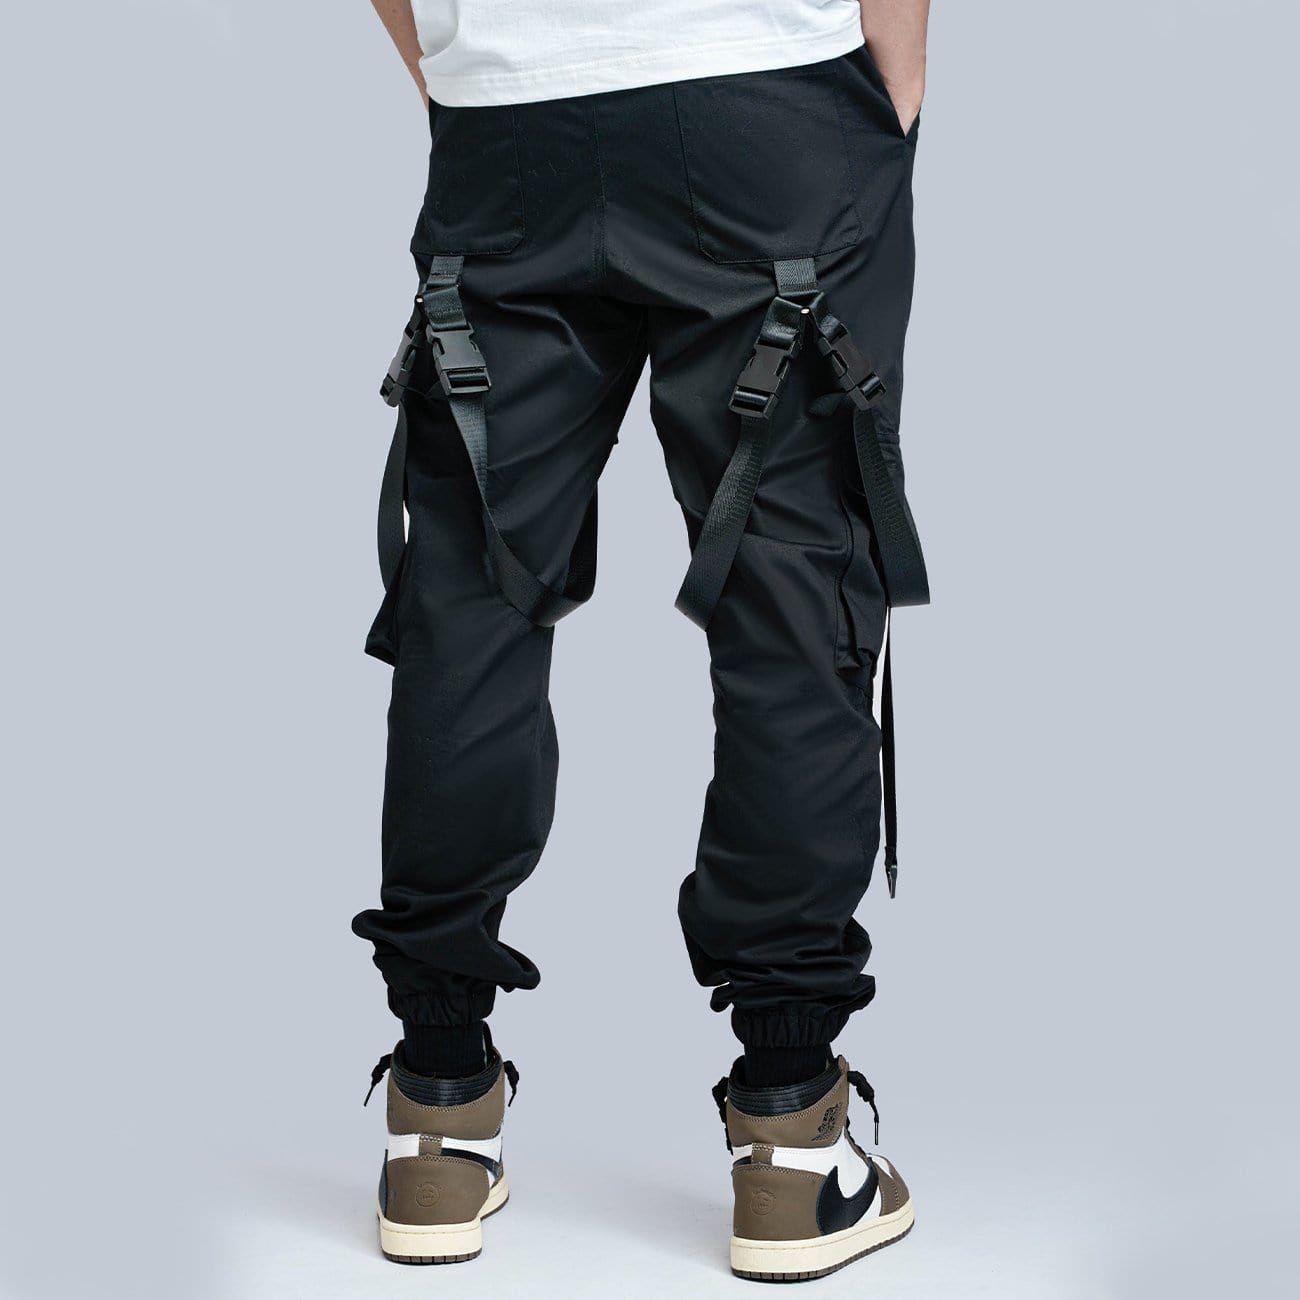 TO Combat Techwear Ribbons Buckle Cargo Pants